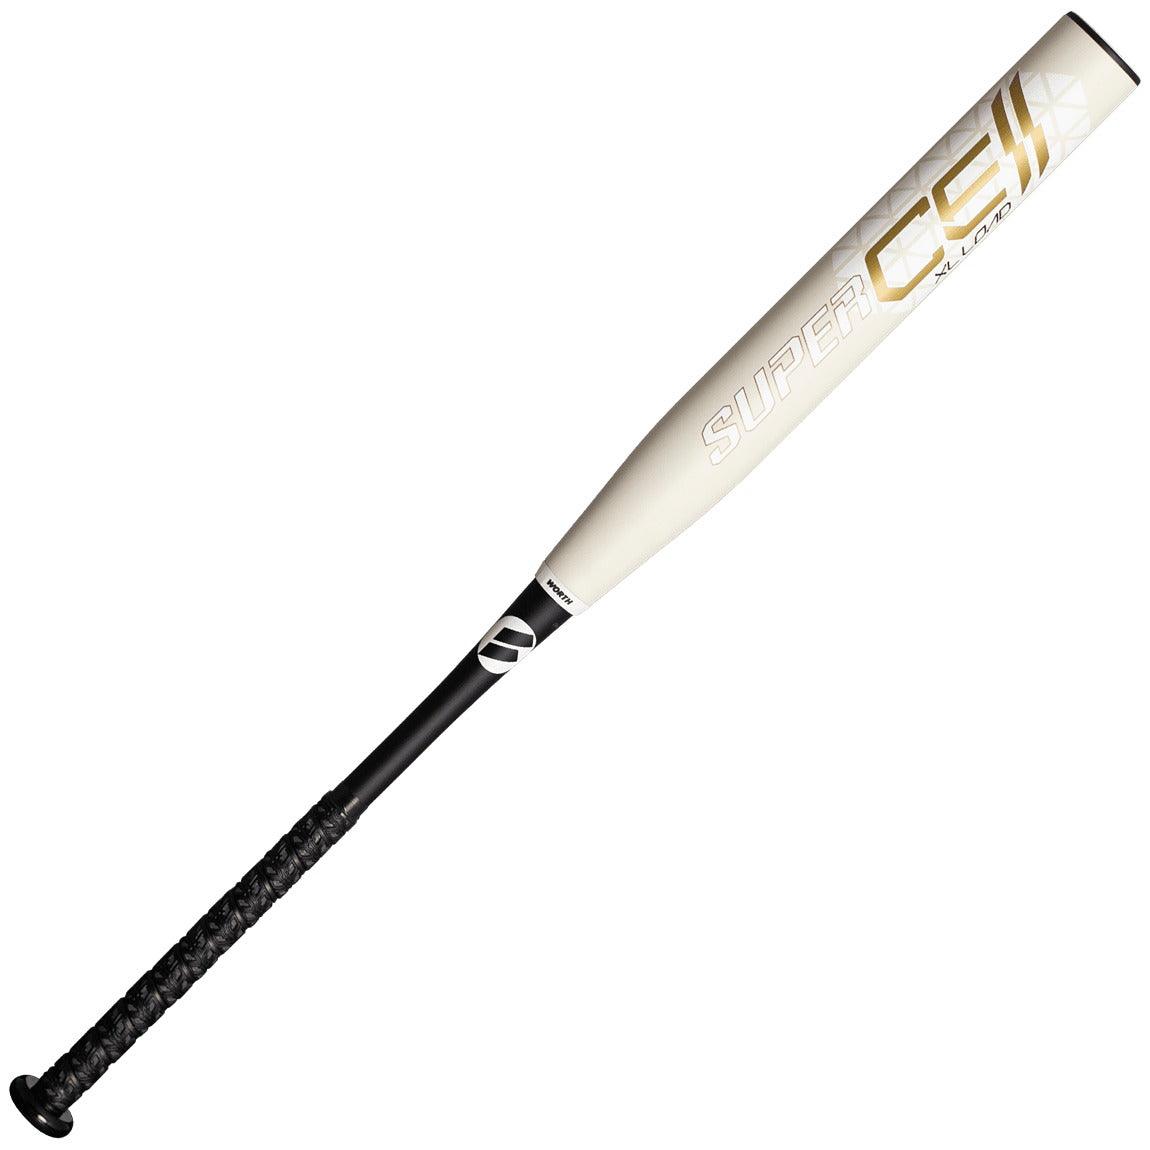 Supercell Gold XL 13.25" USSSA Slowpitch Softball Bat - Sports Excellence